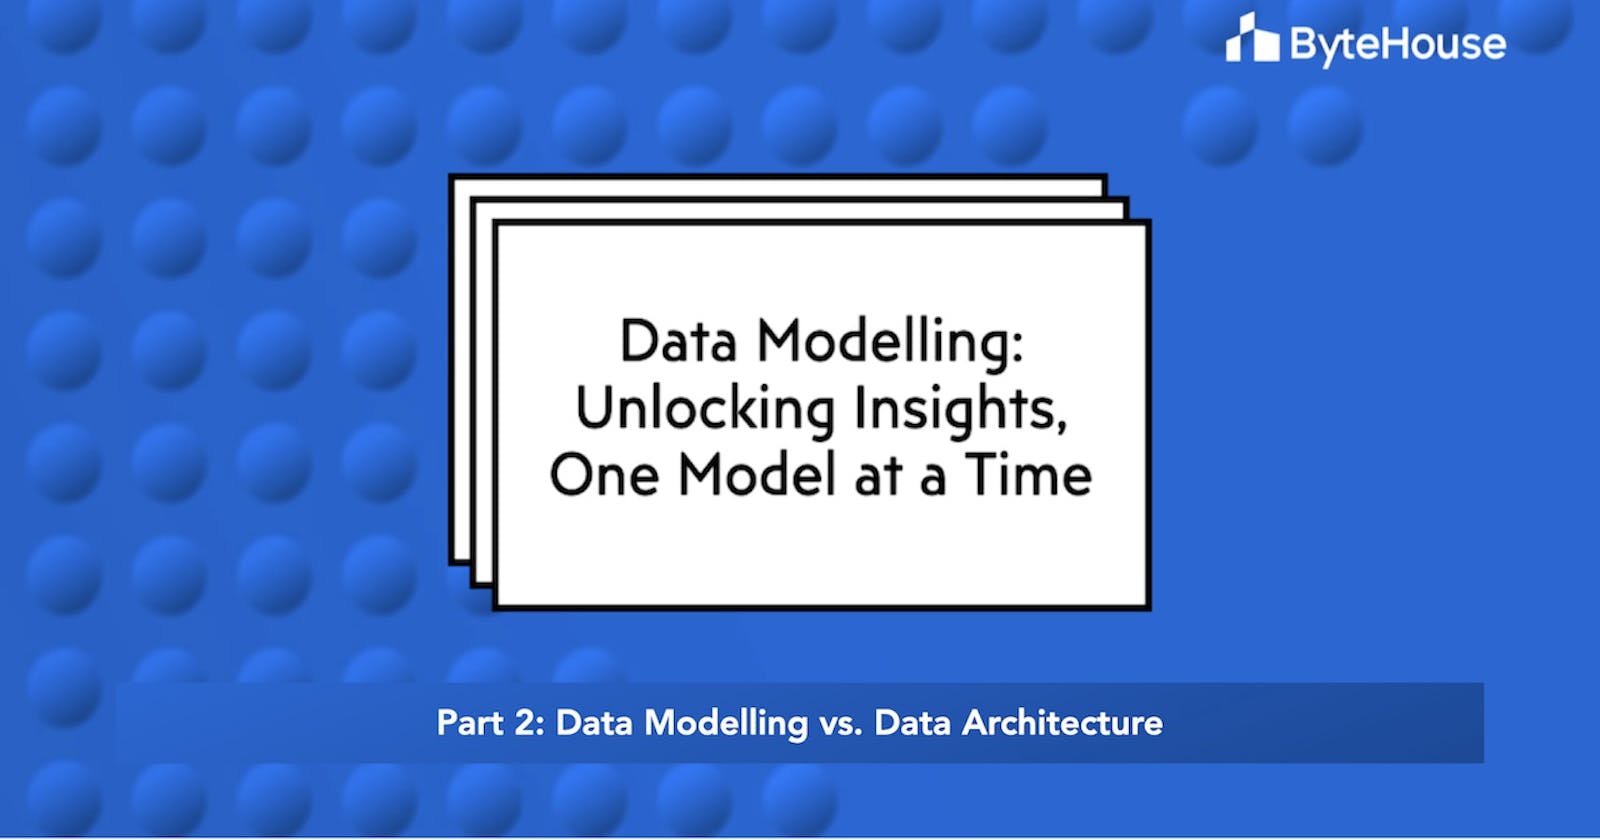 Data modelling vs. Data architecture: What's the difference?